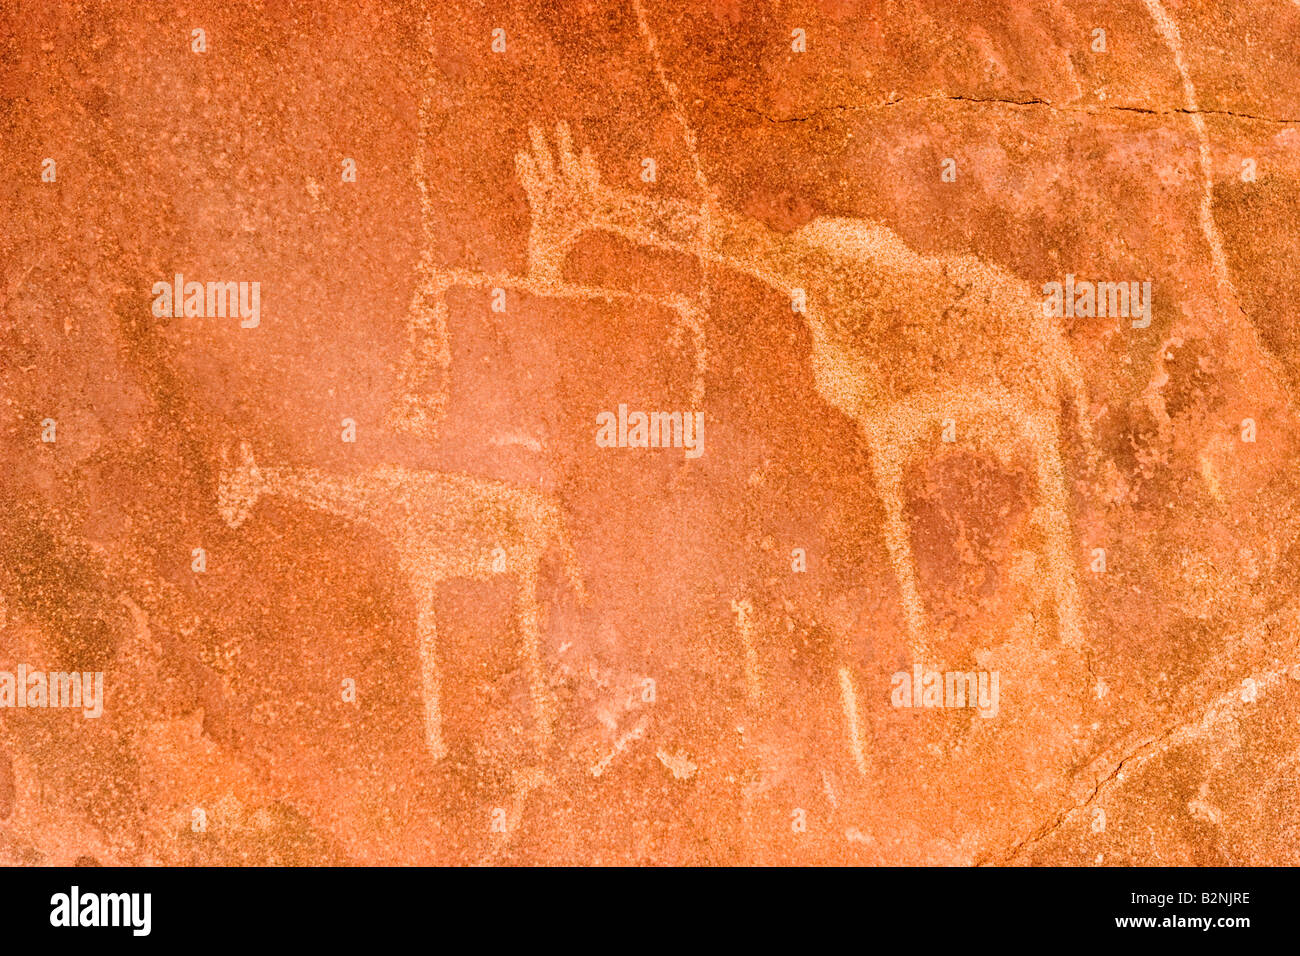 Ancient Rock Art in Twyfelfontein, Namibia Stock Photo